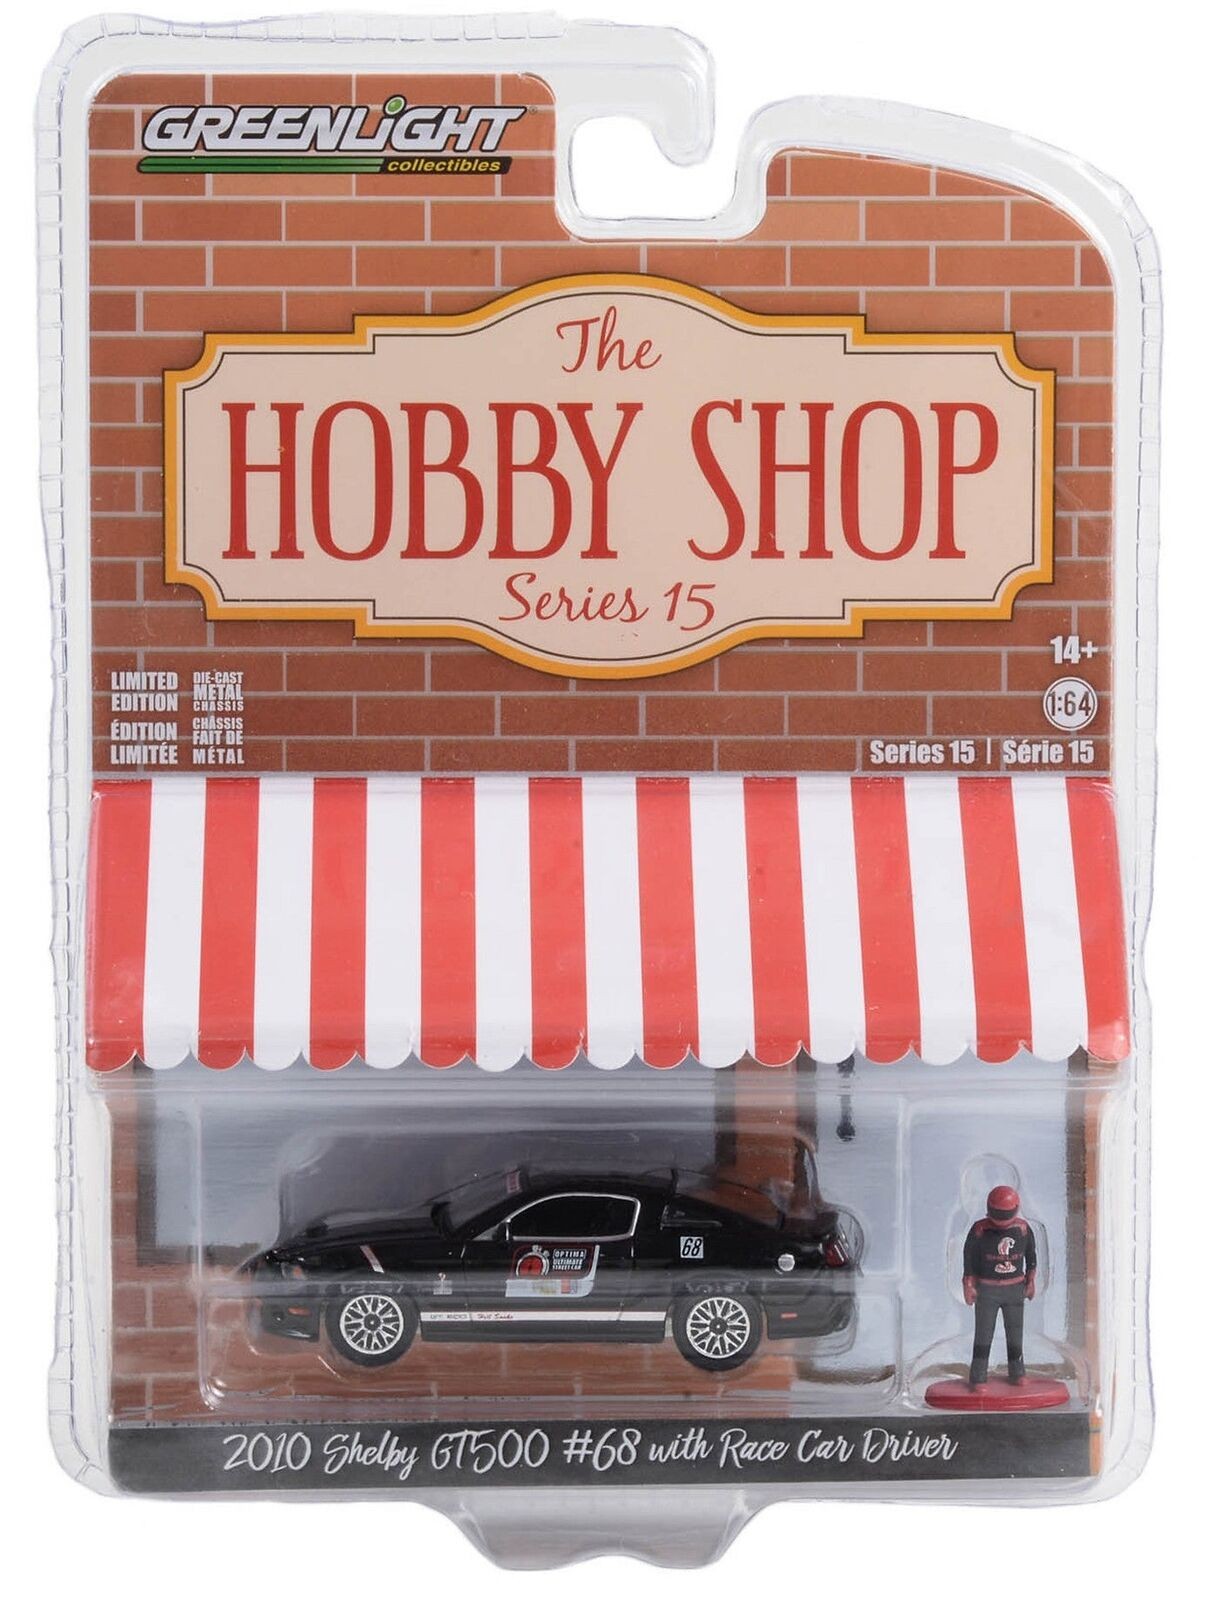 Greenlight 2010 Shelby GT500 #68 The Hobby Shop 1:64